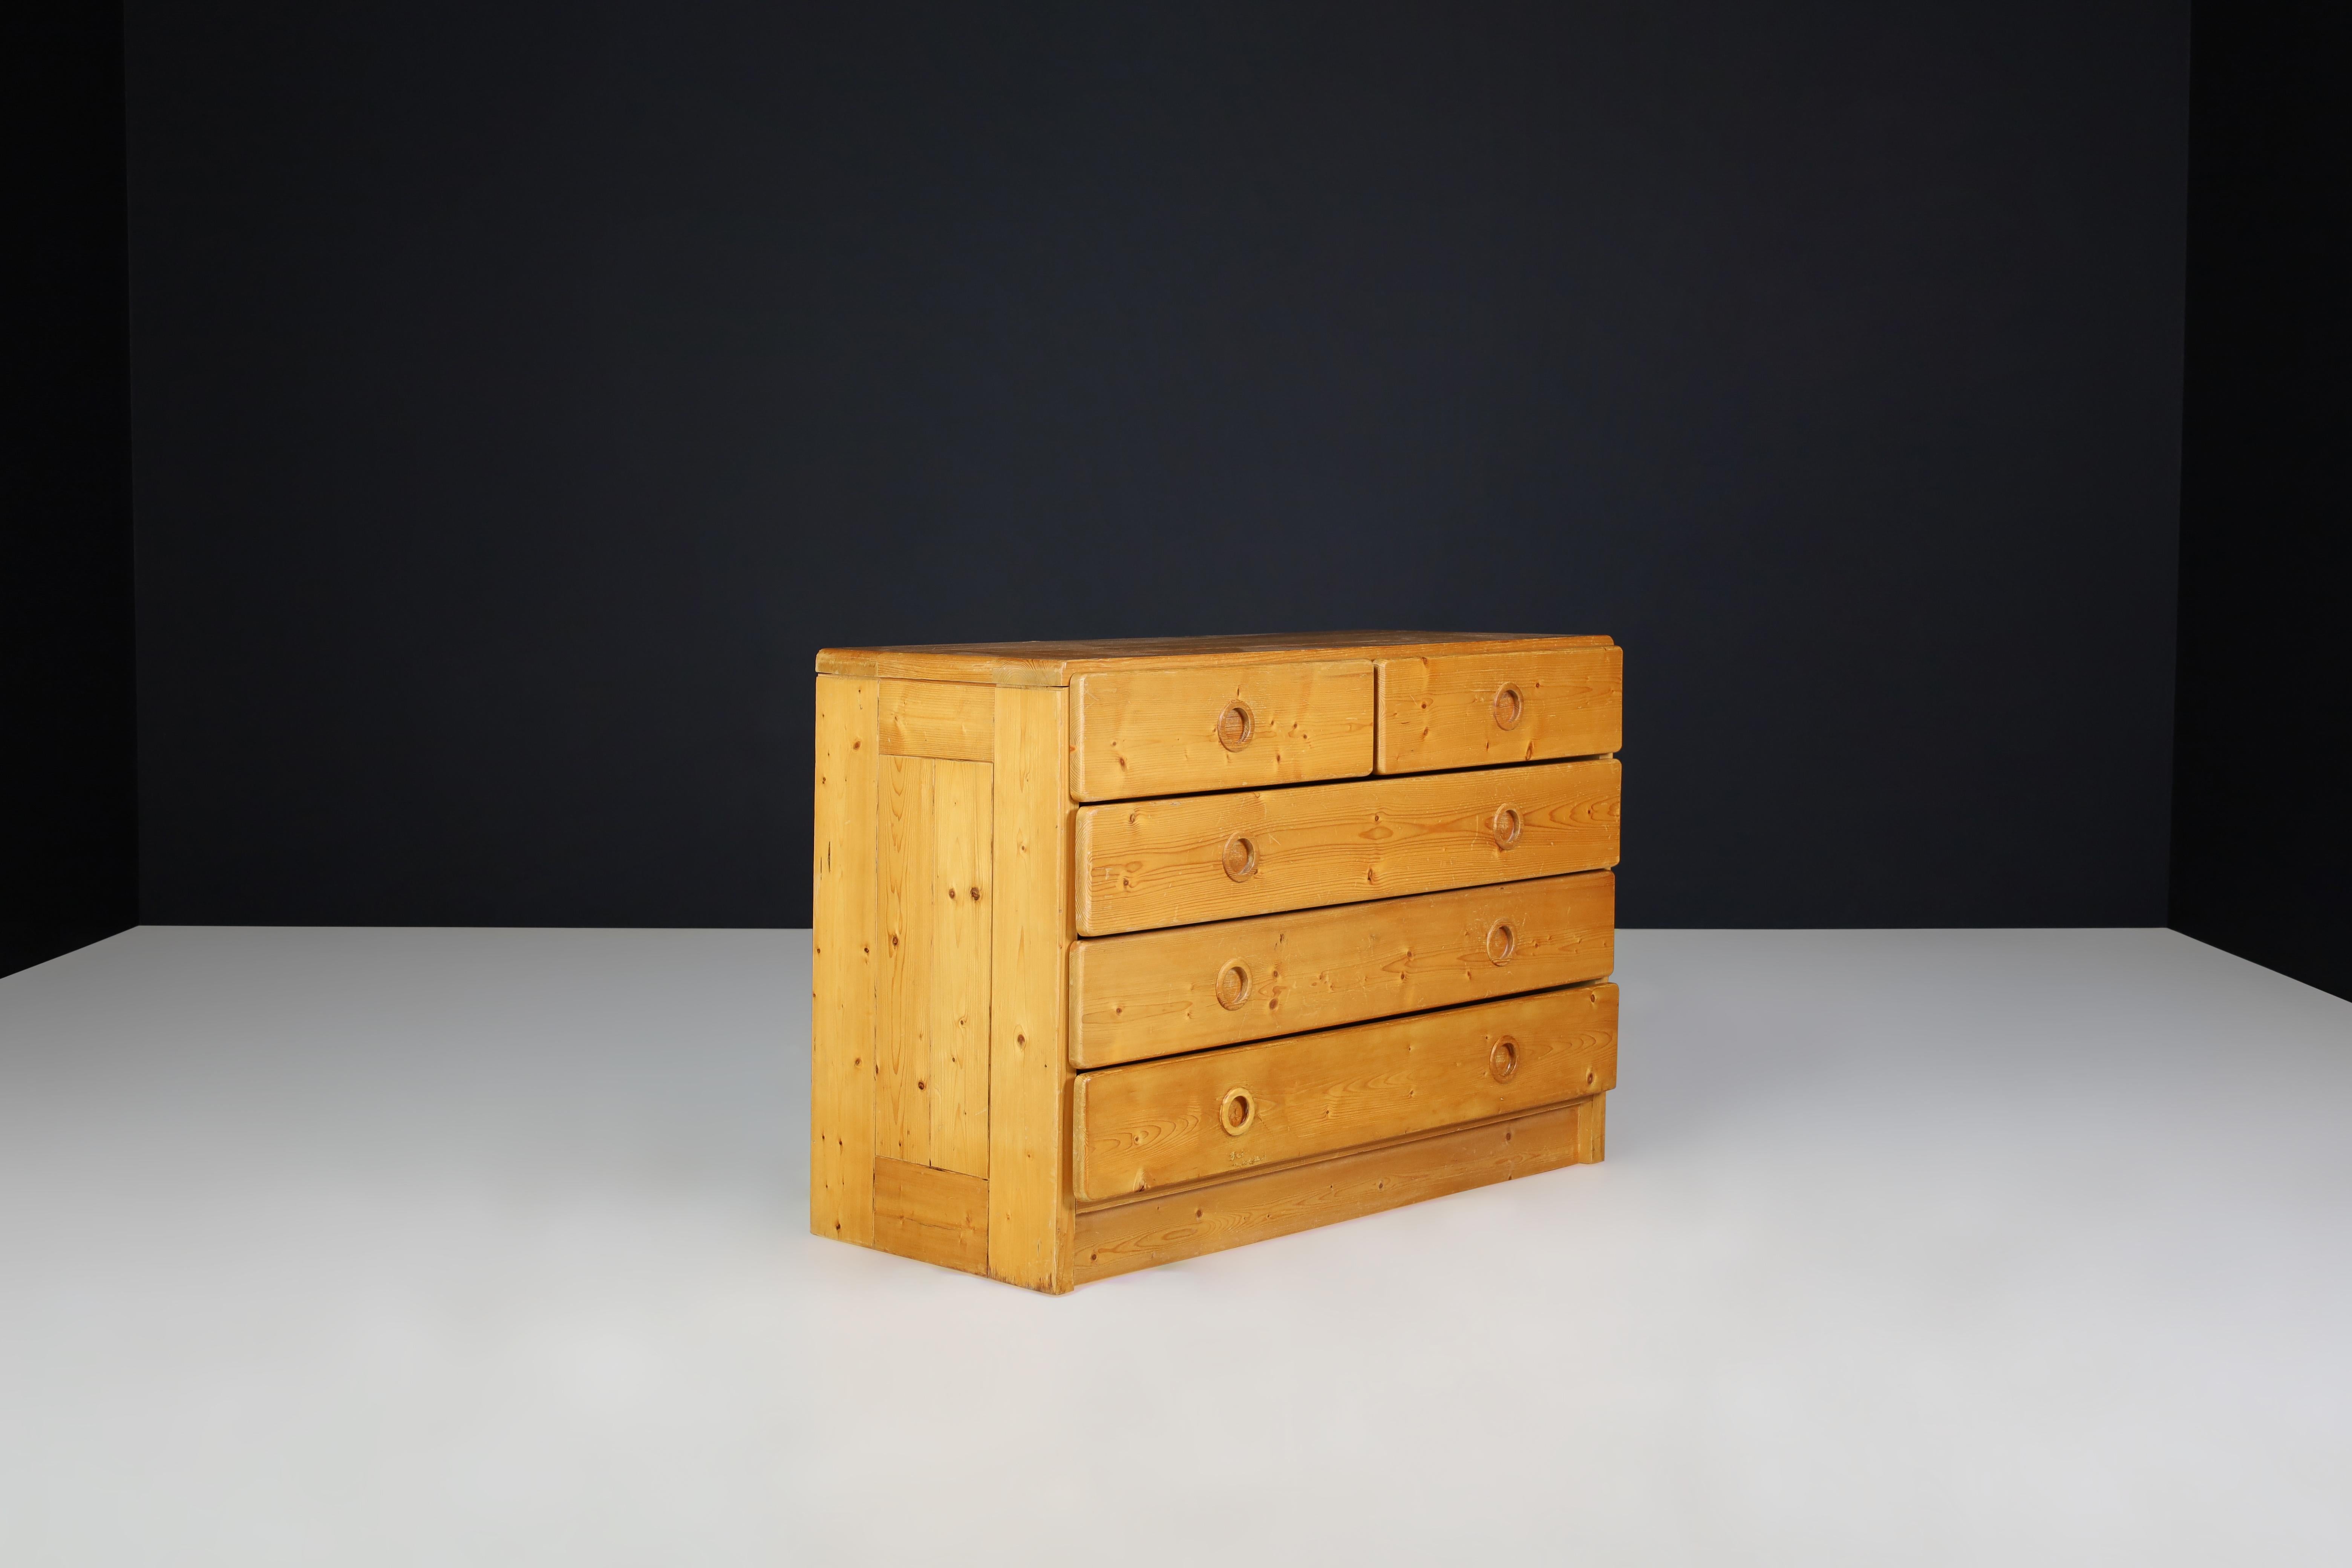 Charlotte Perriand Chest of Drawers for Les Arcs, France 1960s

This is a description of a pine chest of drawers that was designed by Charlotte Perriand for Les Arcs in the 1960s. The chest features five pull-out drawers and is made of solid pine.